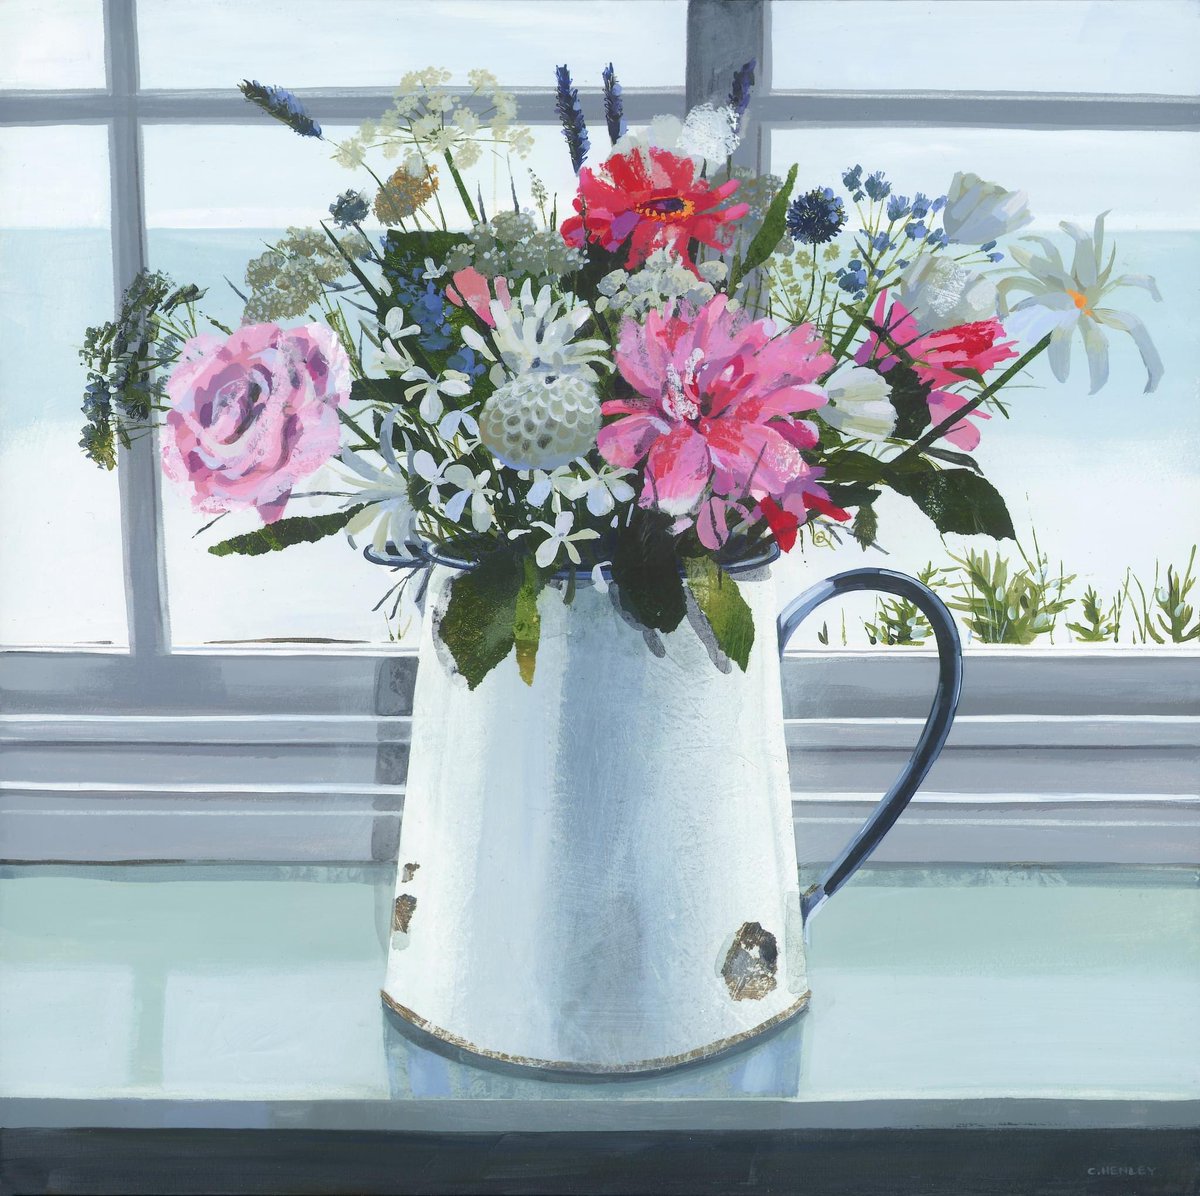 Good morning!
Here's the finished, scanned painting of my @HarbourGallery exhibition flowers, beautifully arranged by the gallery manager, Joanna. 
#portscatho #fishermansshelter #floral #floralarrangement